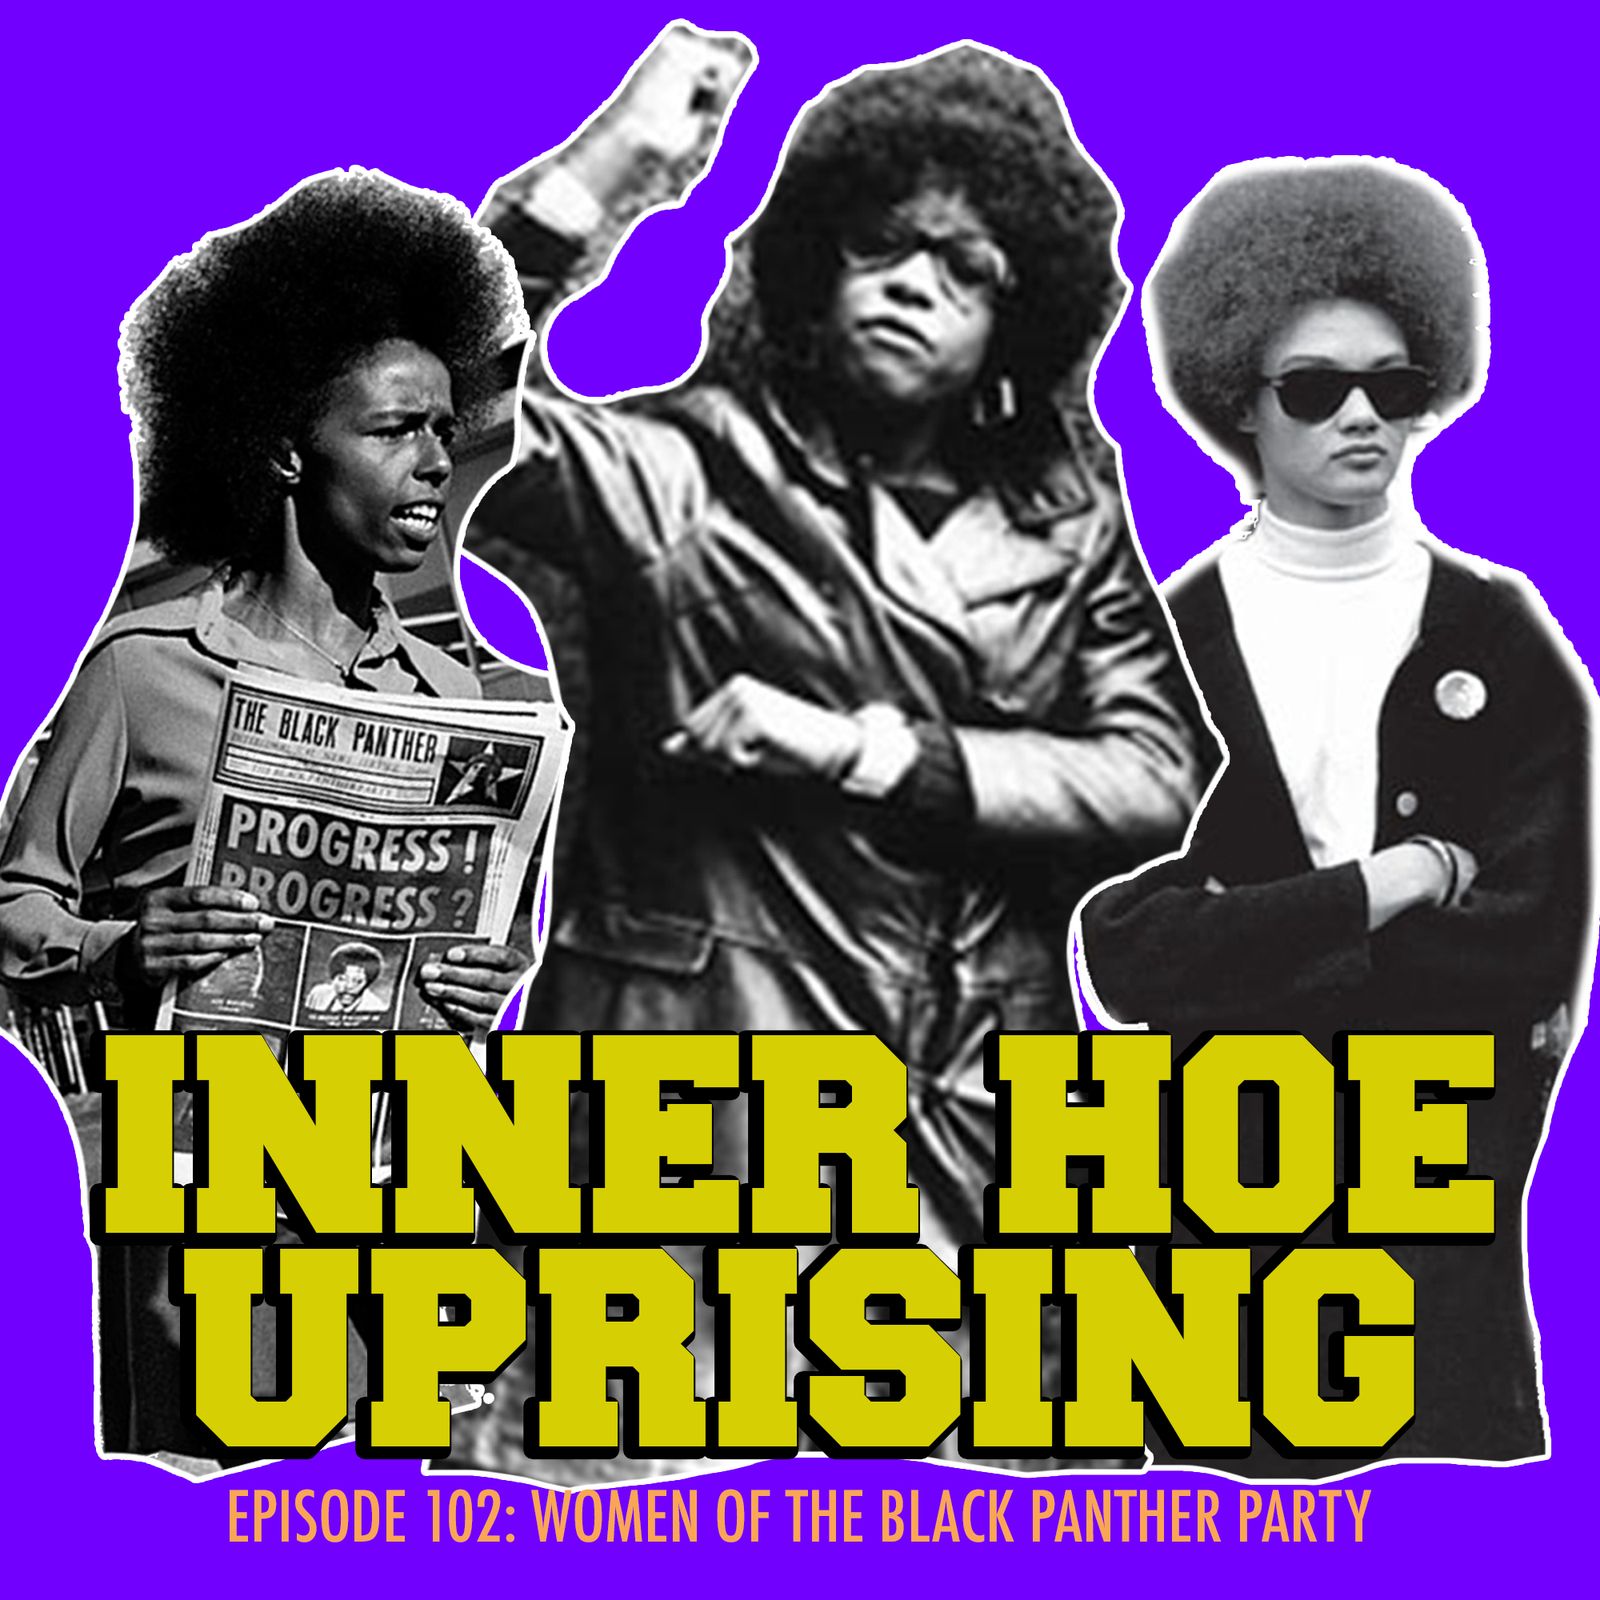 Thumbnail for "S4 Ep6: Women of the Black Panther Party".